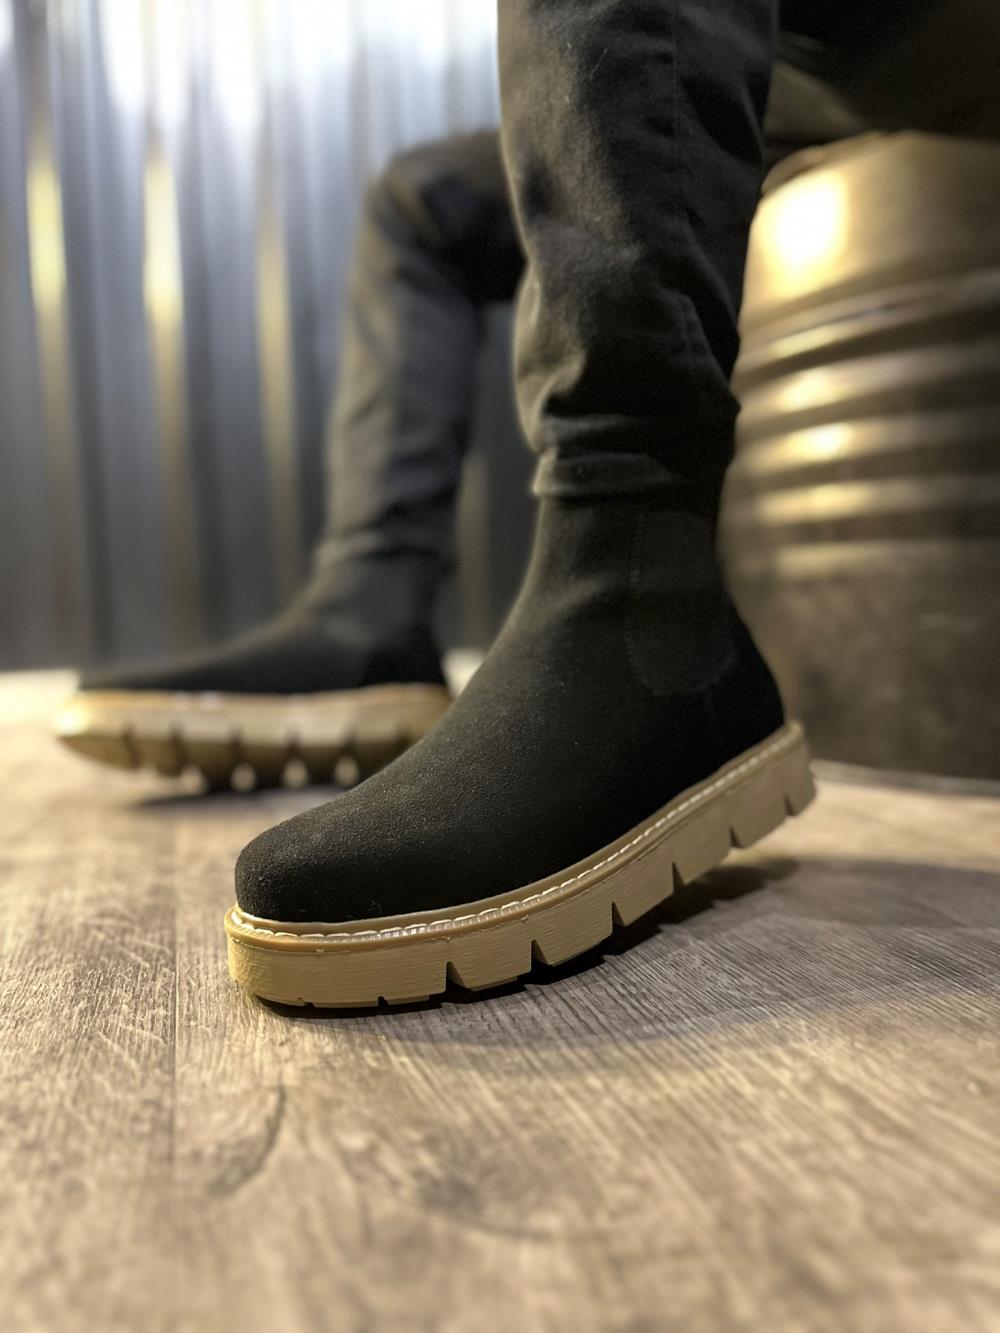 Men's High Sole Chelsea Boots 112 Black Suede (Beige Sole) - STREETMODE™